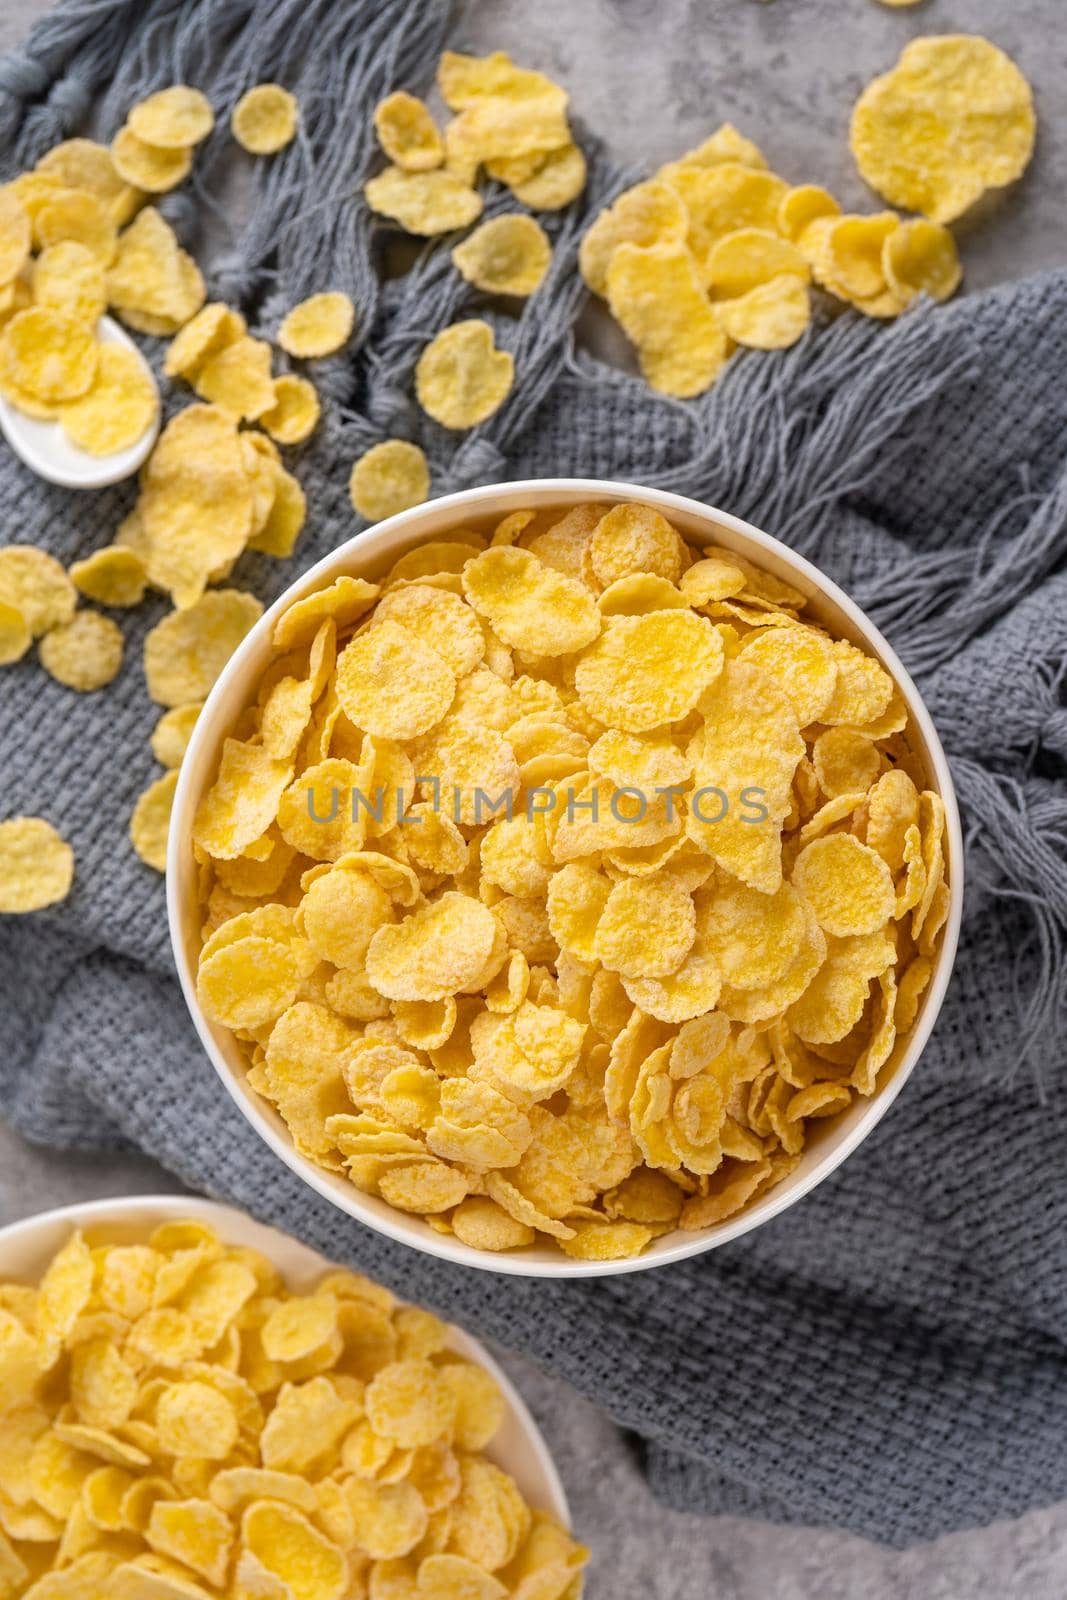 Corn flakes bowl sweets on gray cement background, top view flat lay layout design, fresh and healthy breakbast concept. by ROMIXIMAGE